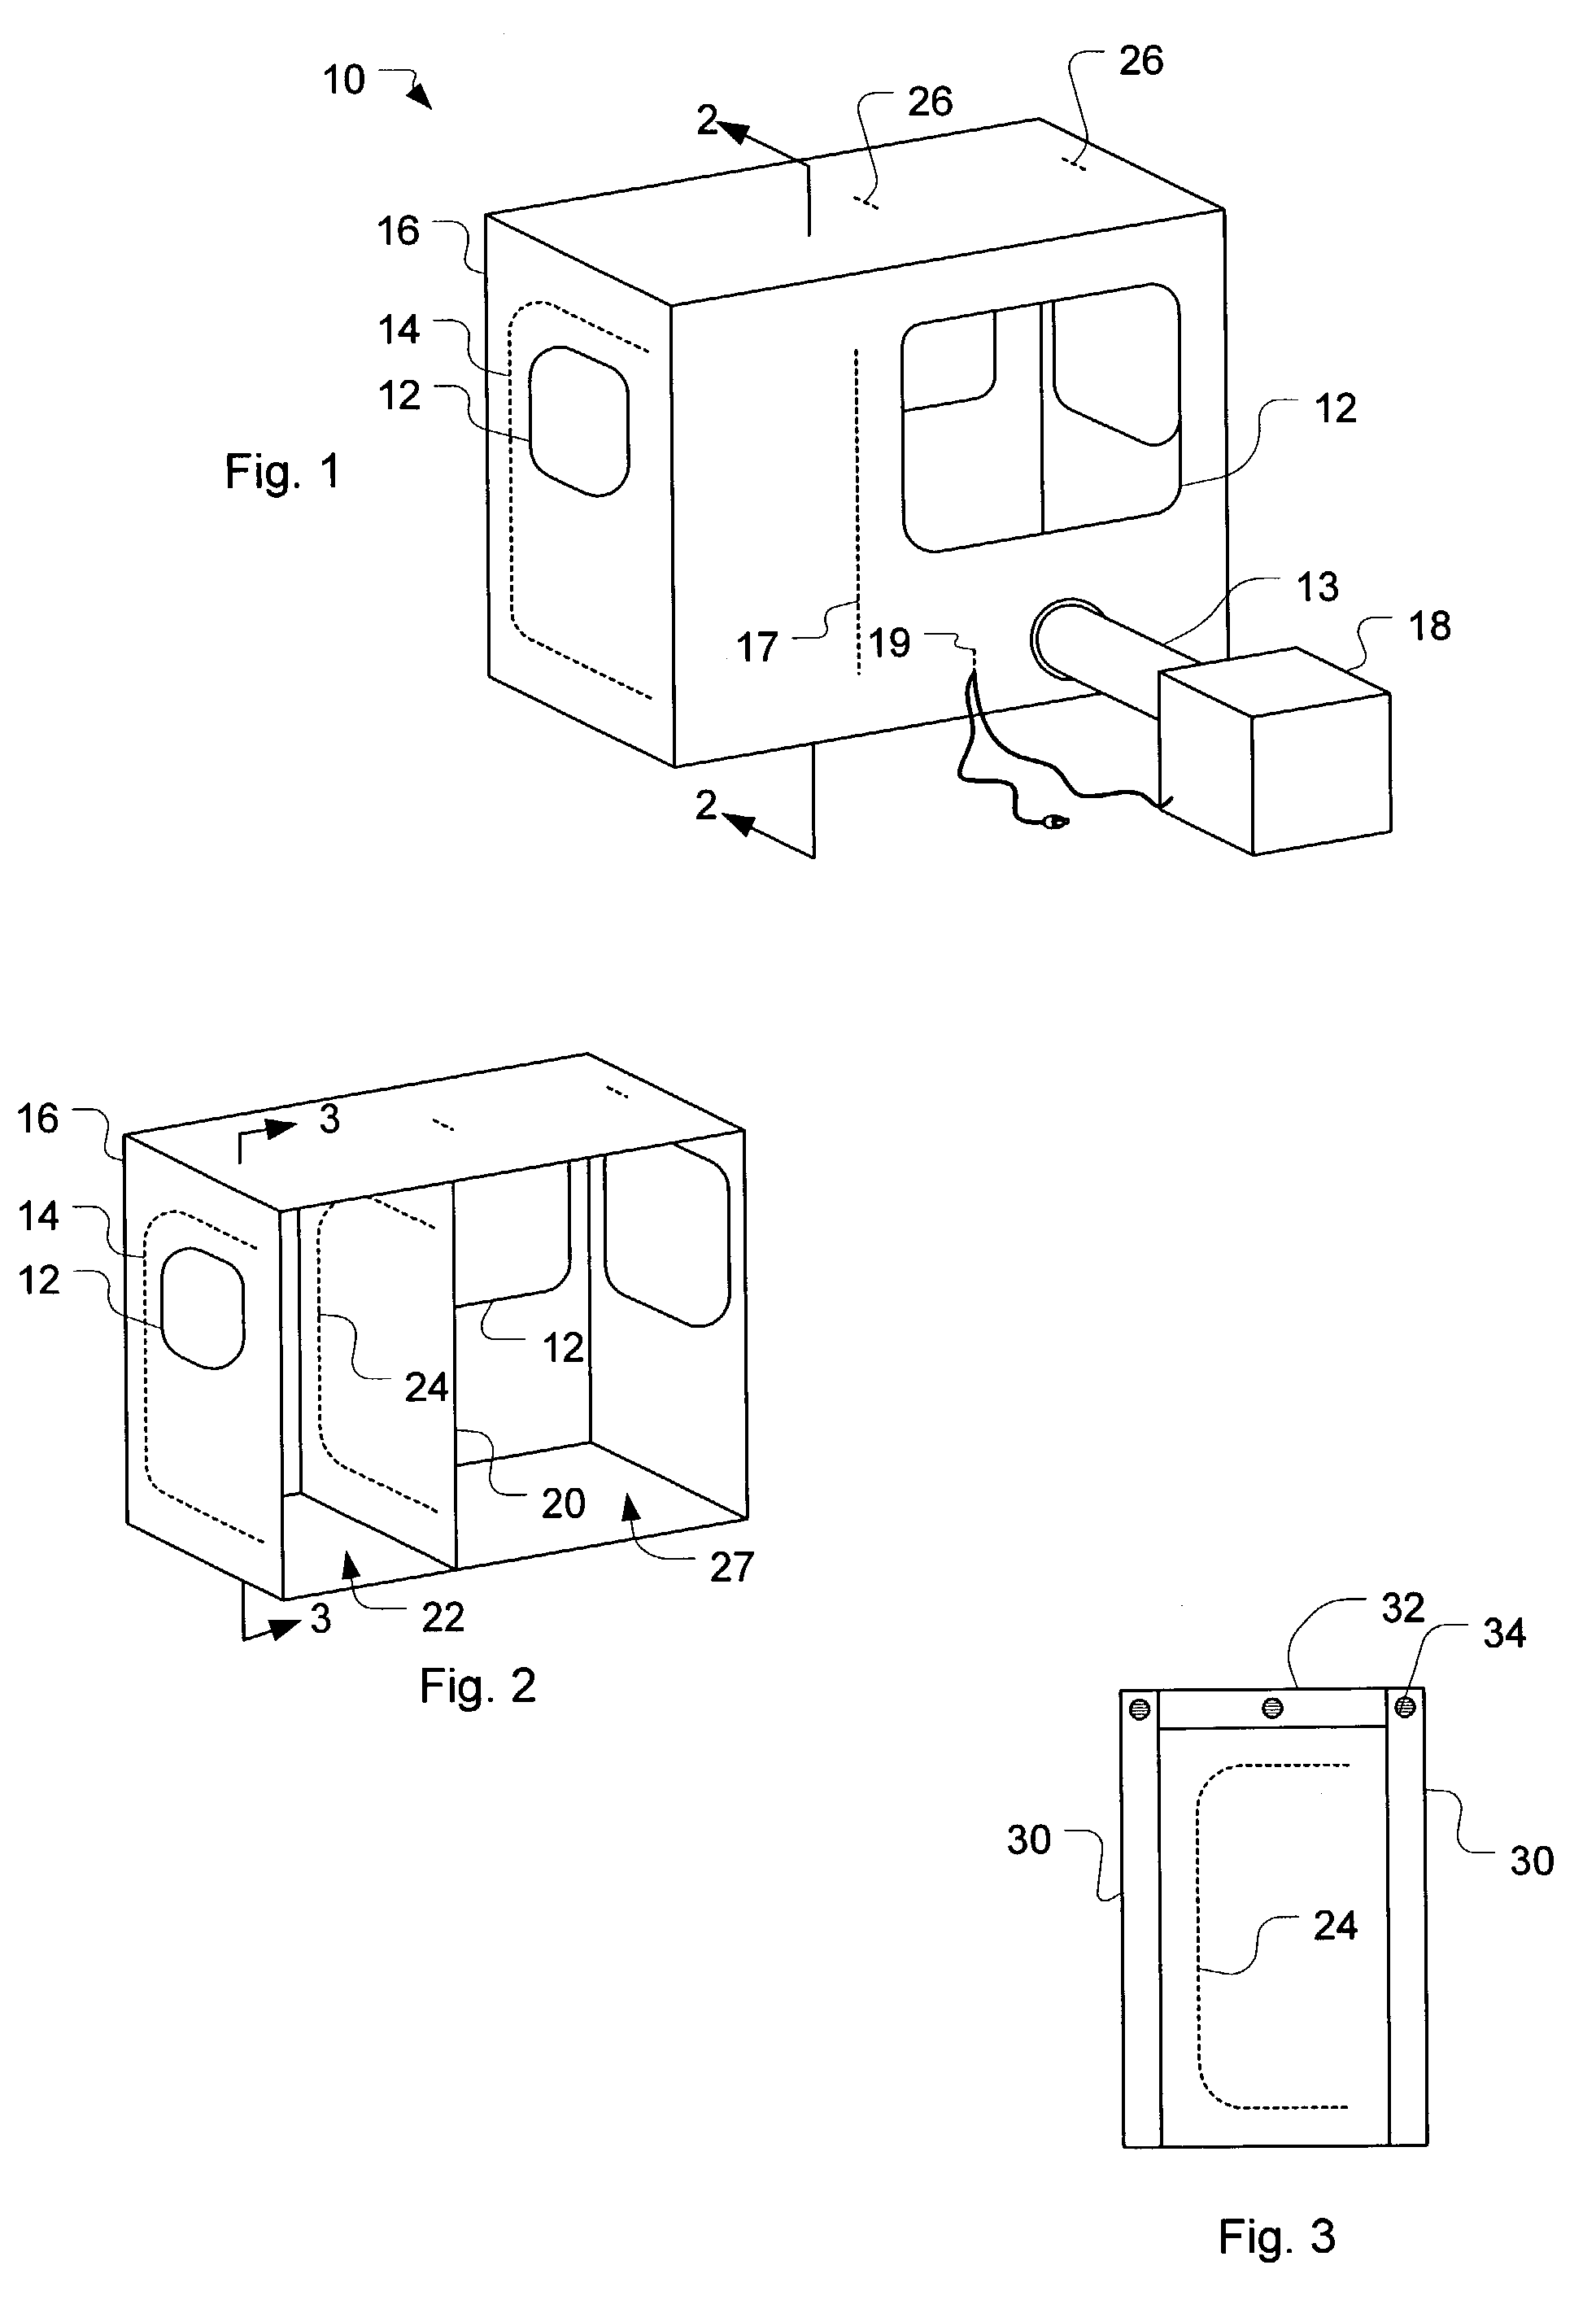 Low pressure hyperbaric chamber and method of using the same